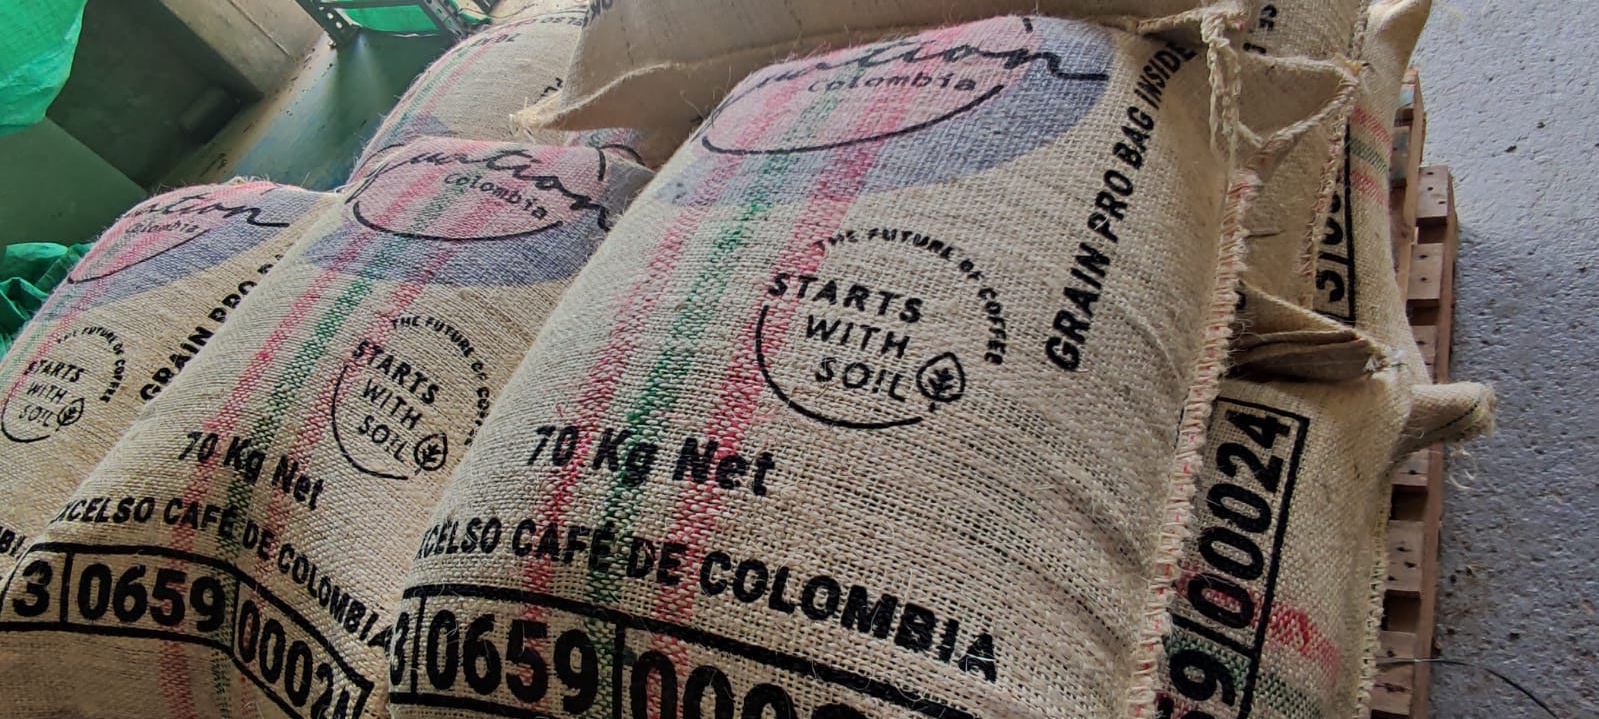 STARTS WITH SOIL Tolima Regional Washed (CAD $4.95/lb)